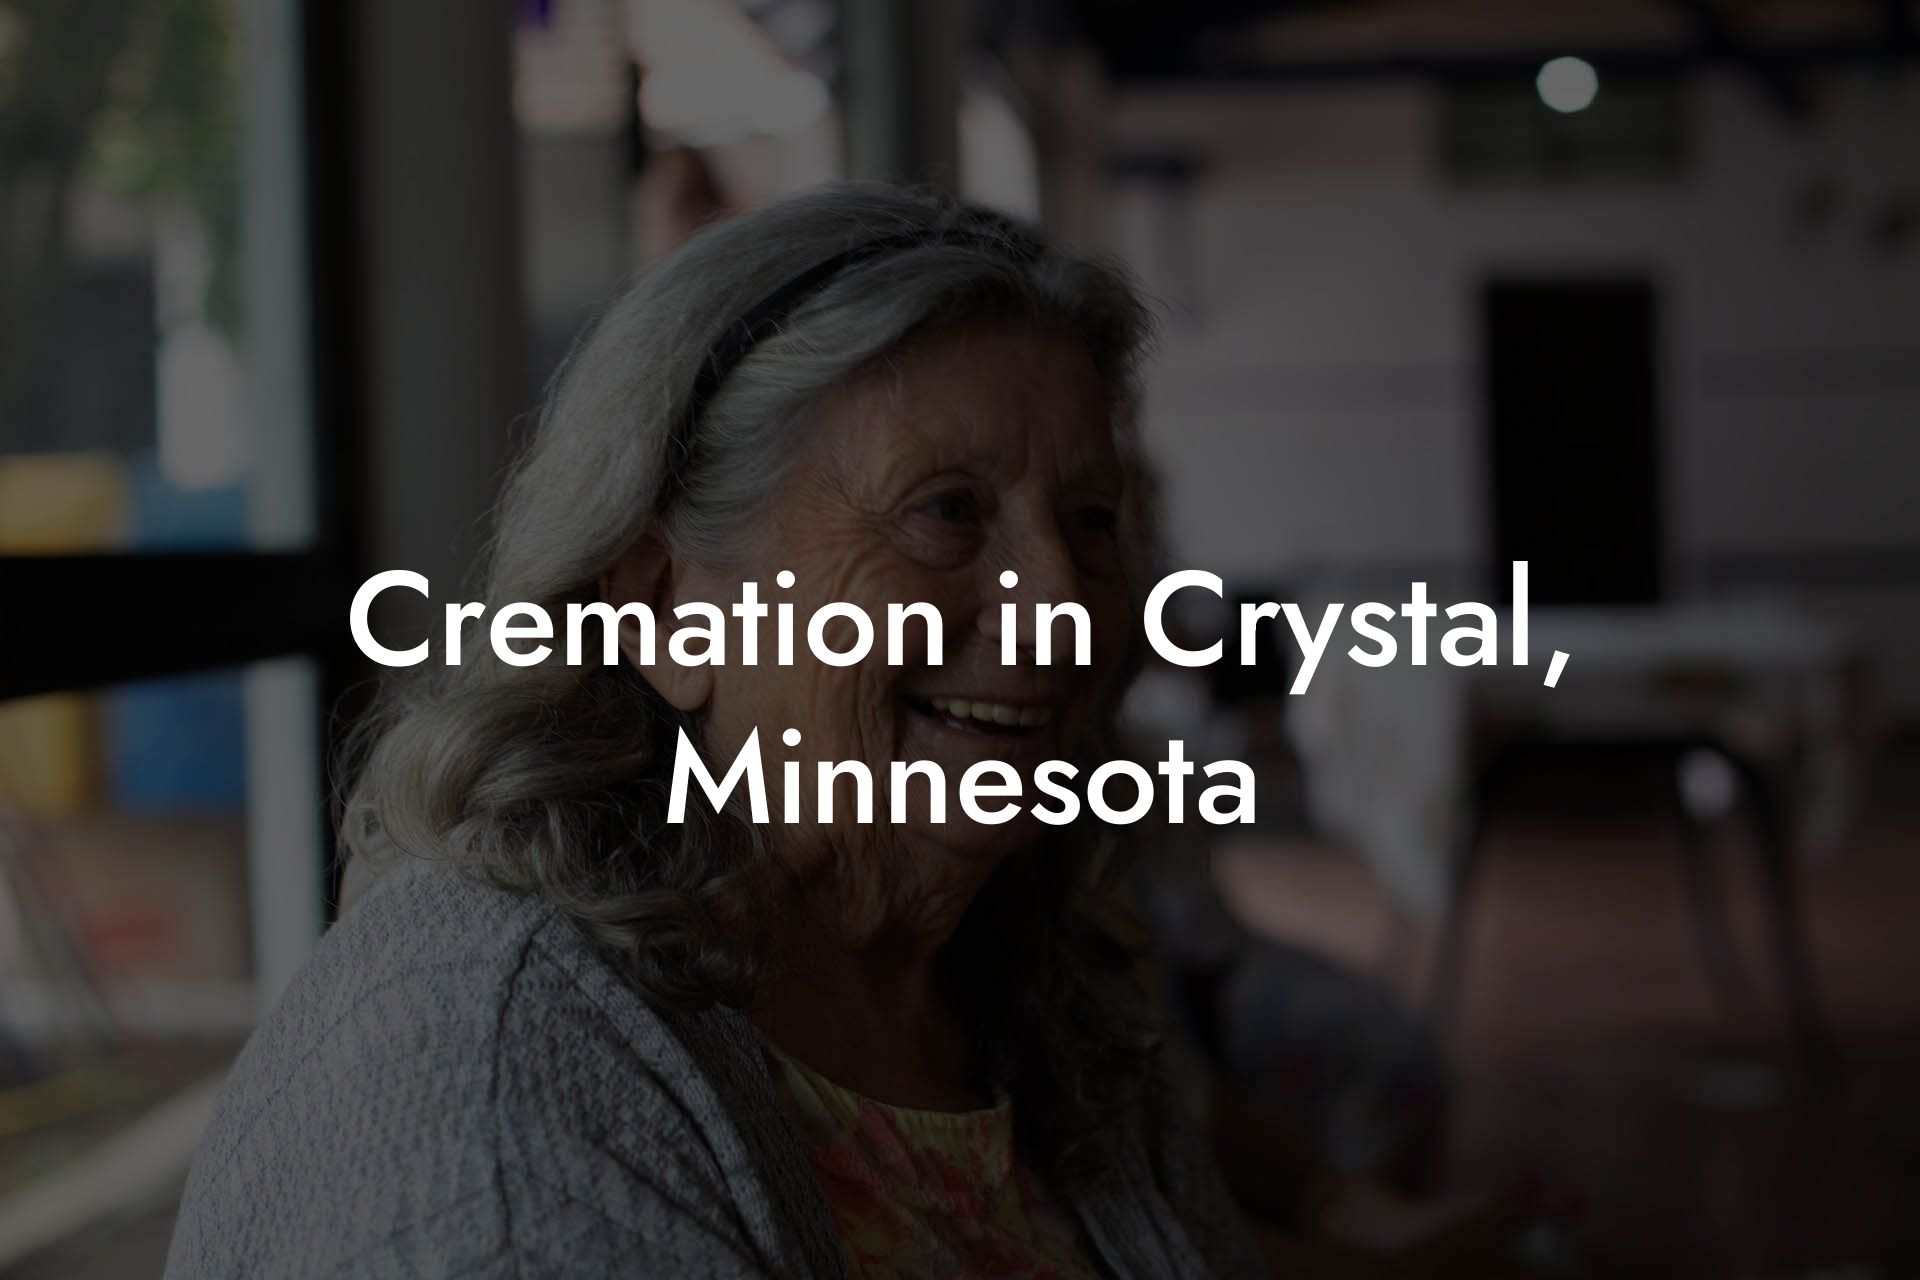 Cremation in Crystal, Minnesota